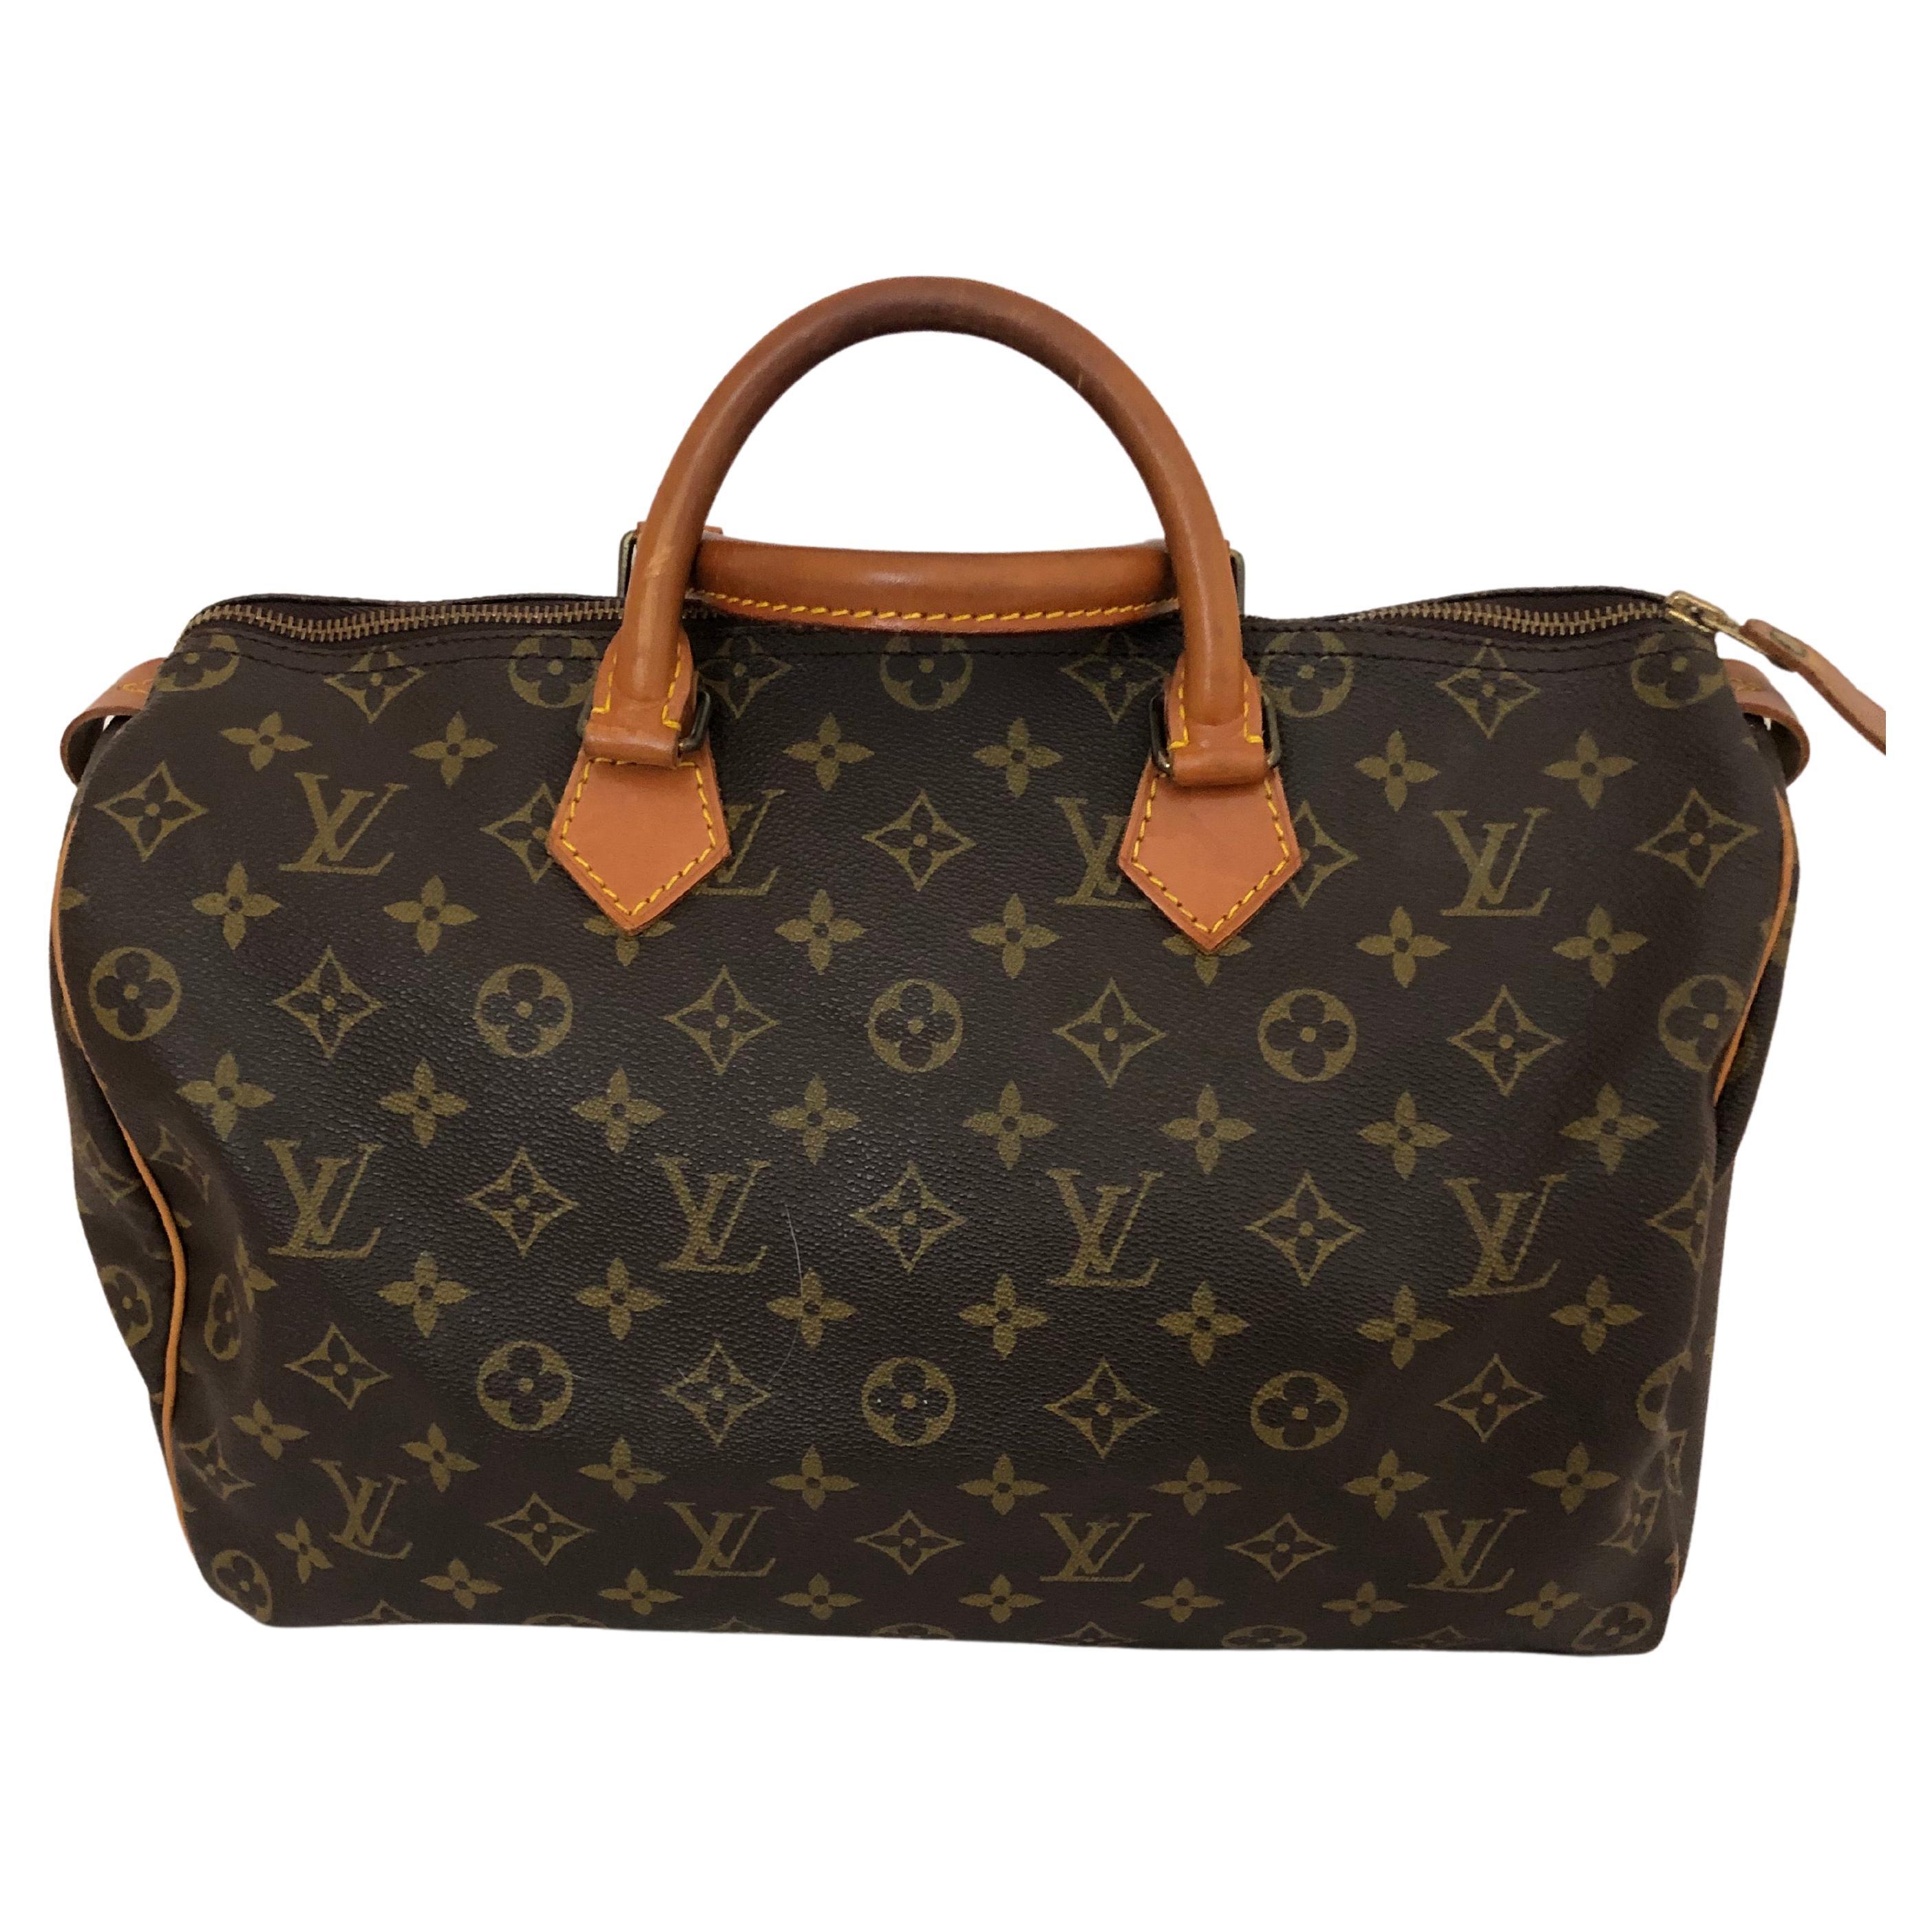 LOUIS VUITTON SPEEDY B 35 REVIEW / PROS & CONS / WIMB / WEAR AND